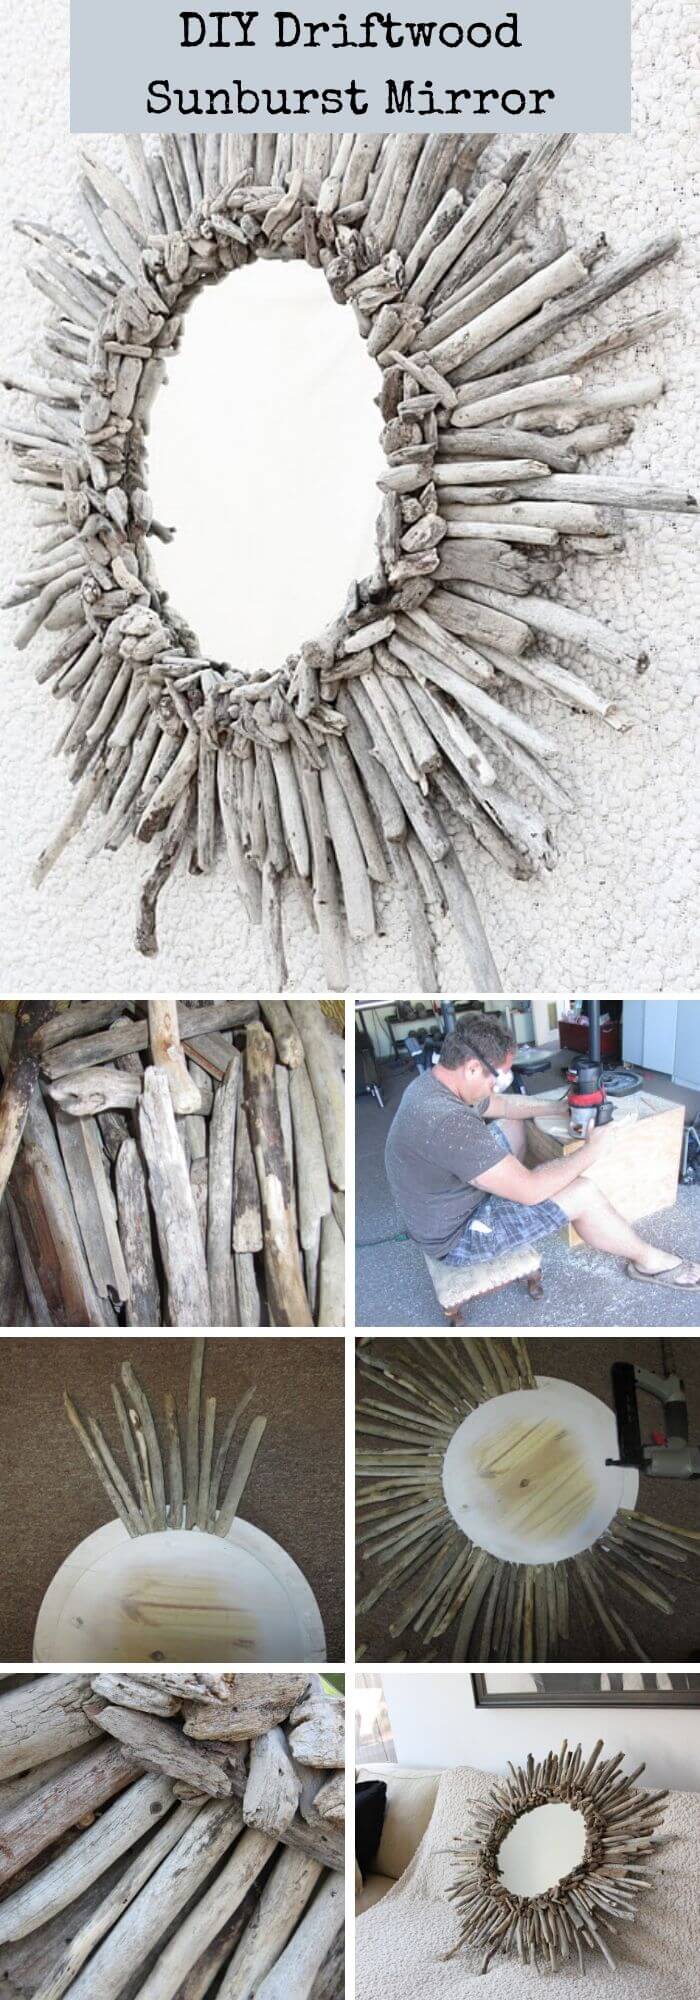 8 driftwood craft projects